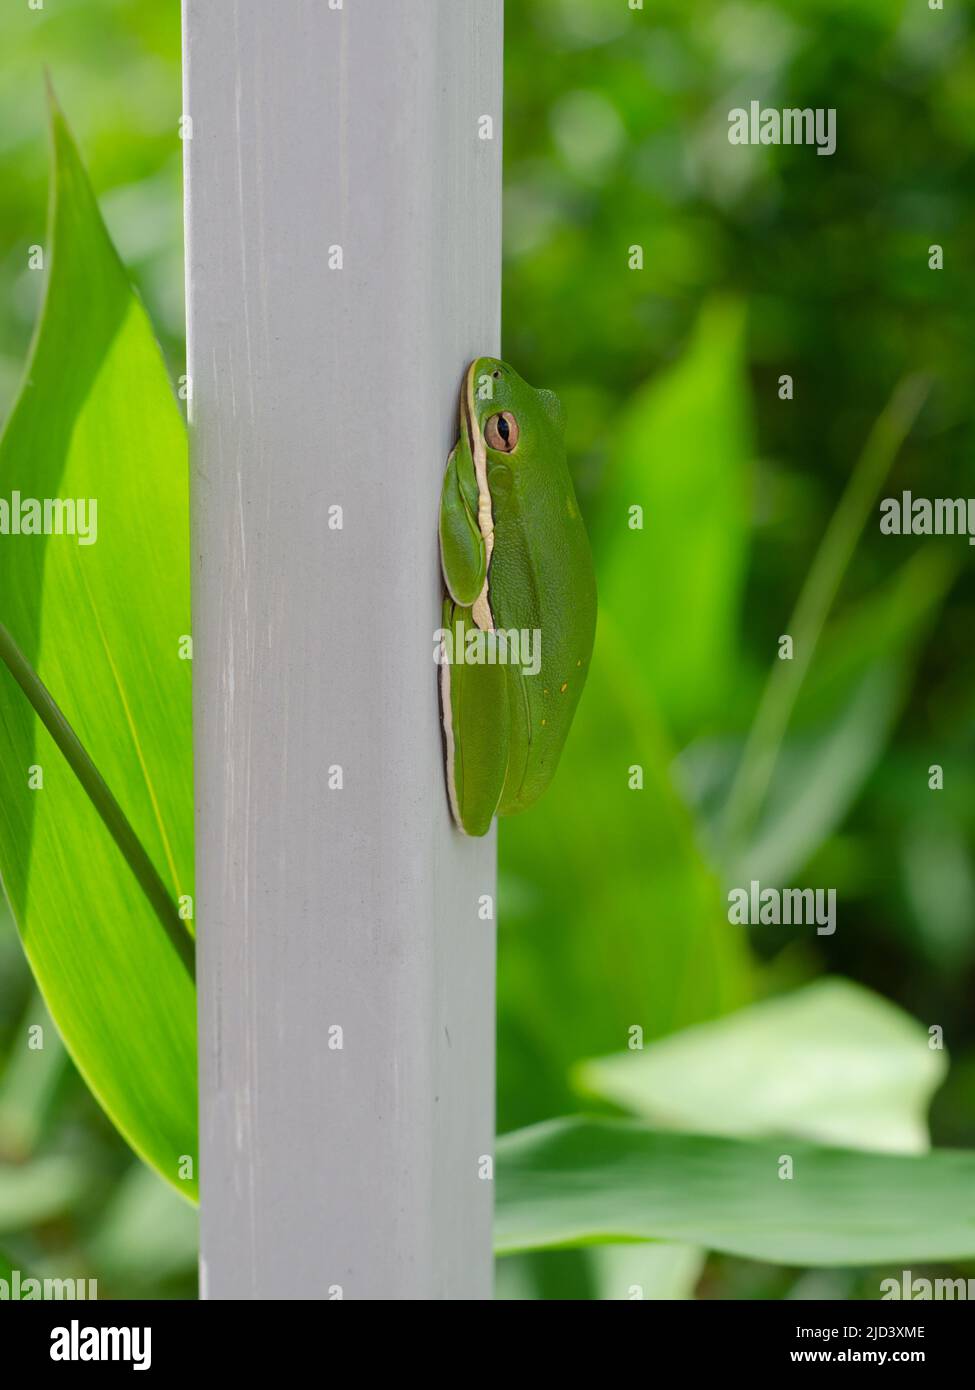 A green tree frog sitting on a white fence. Stock Photo